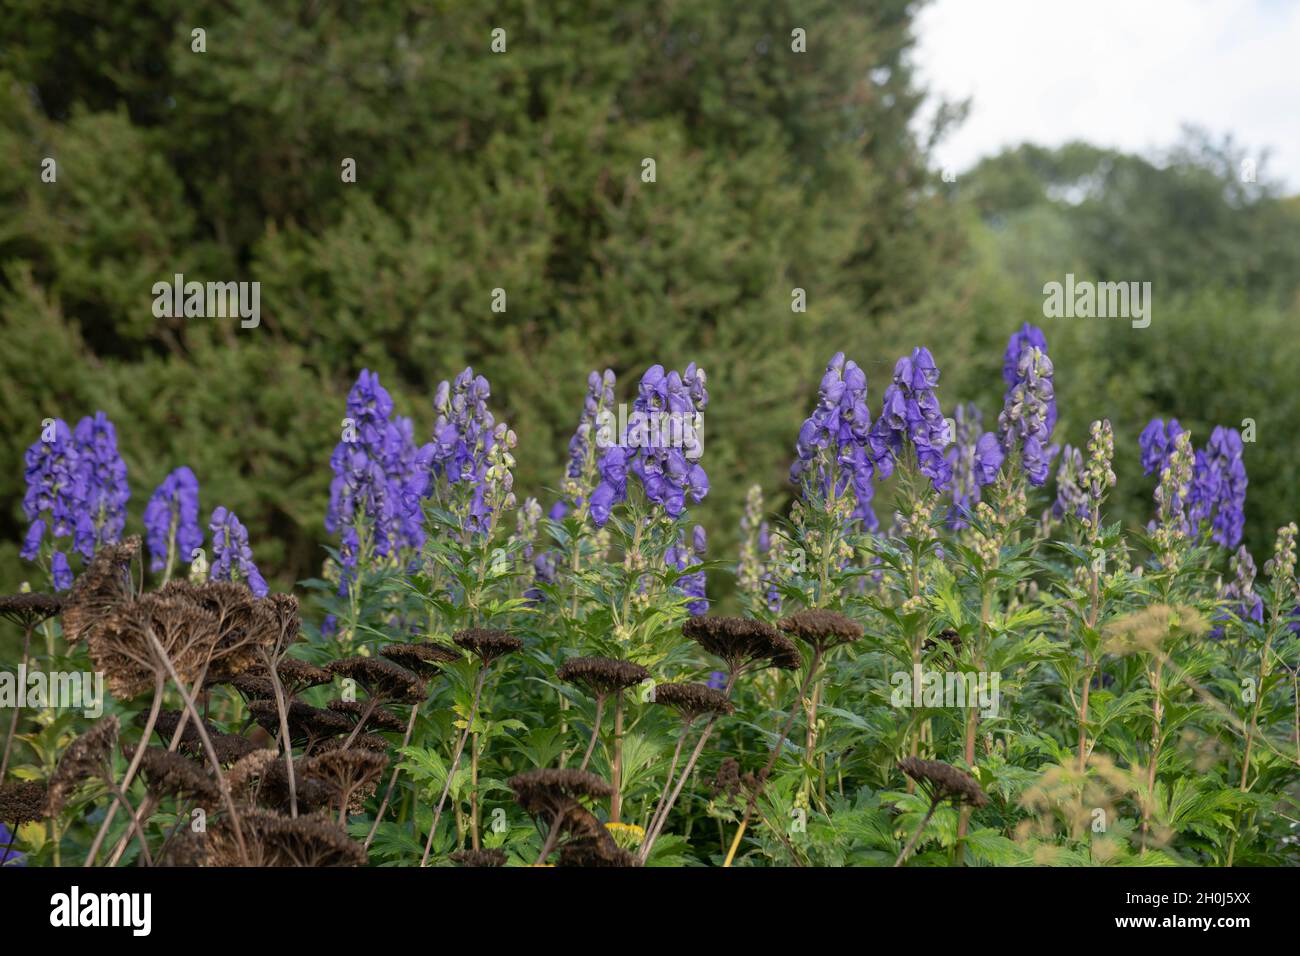 Autumn Flowering Bright Blue Flower Heads on a Perennial Monk's Hood Plant (Aconitum carmichaelii 'Arendsii') Growing in a Herbaceous Border Stock Photo